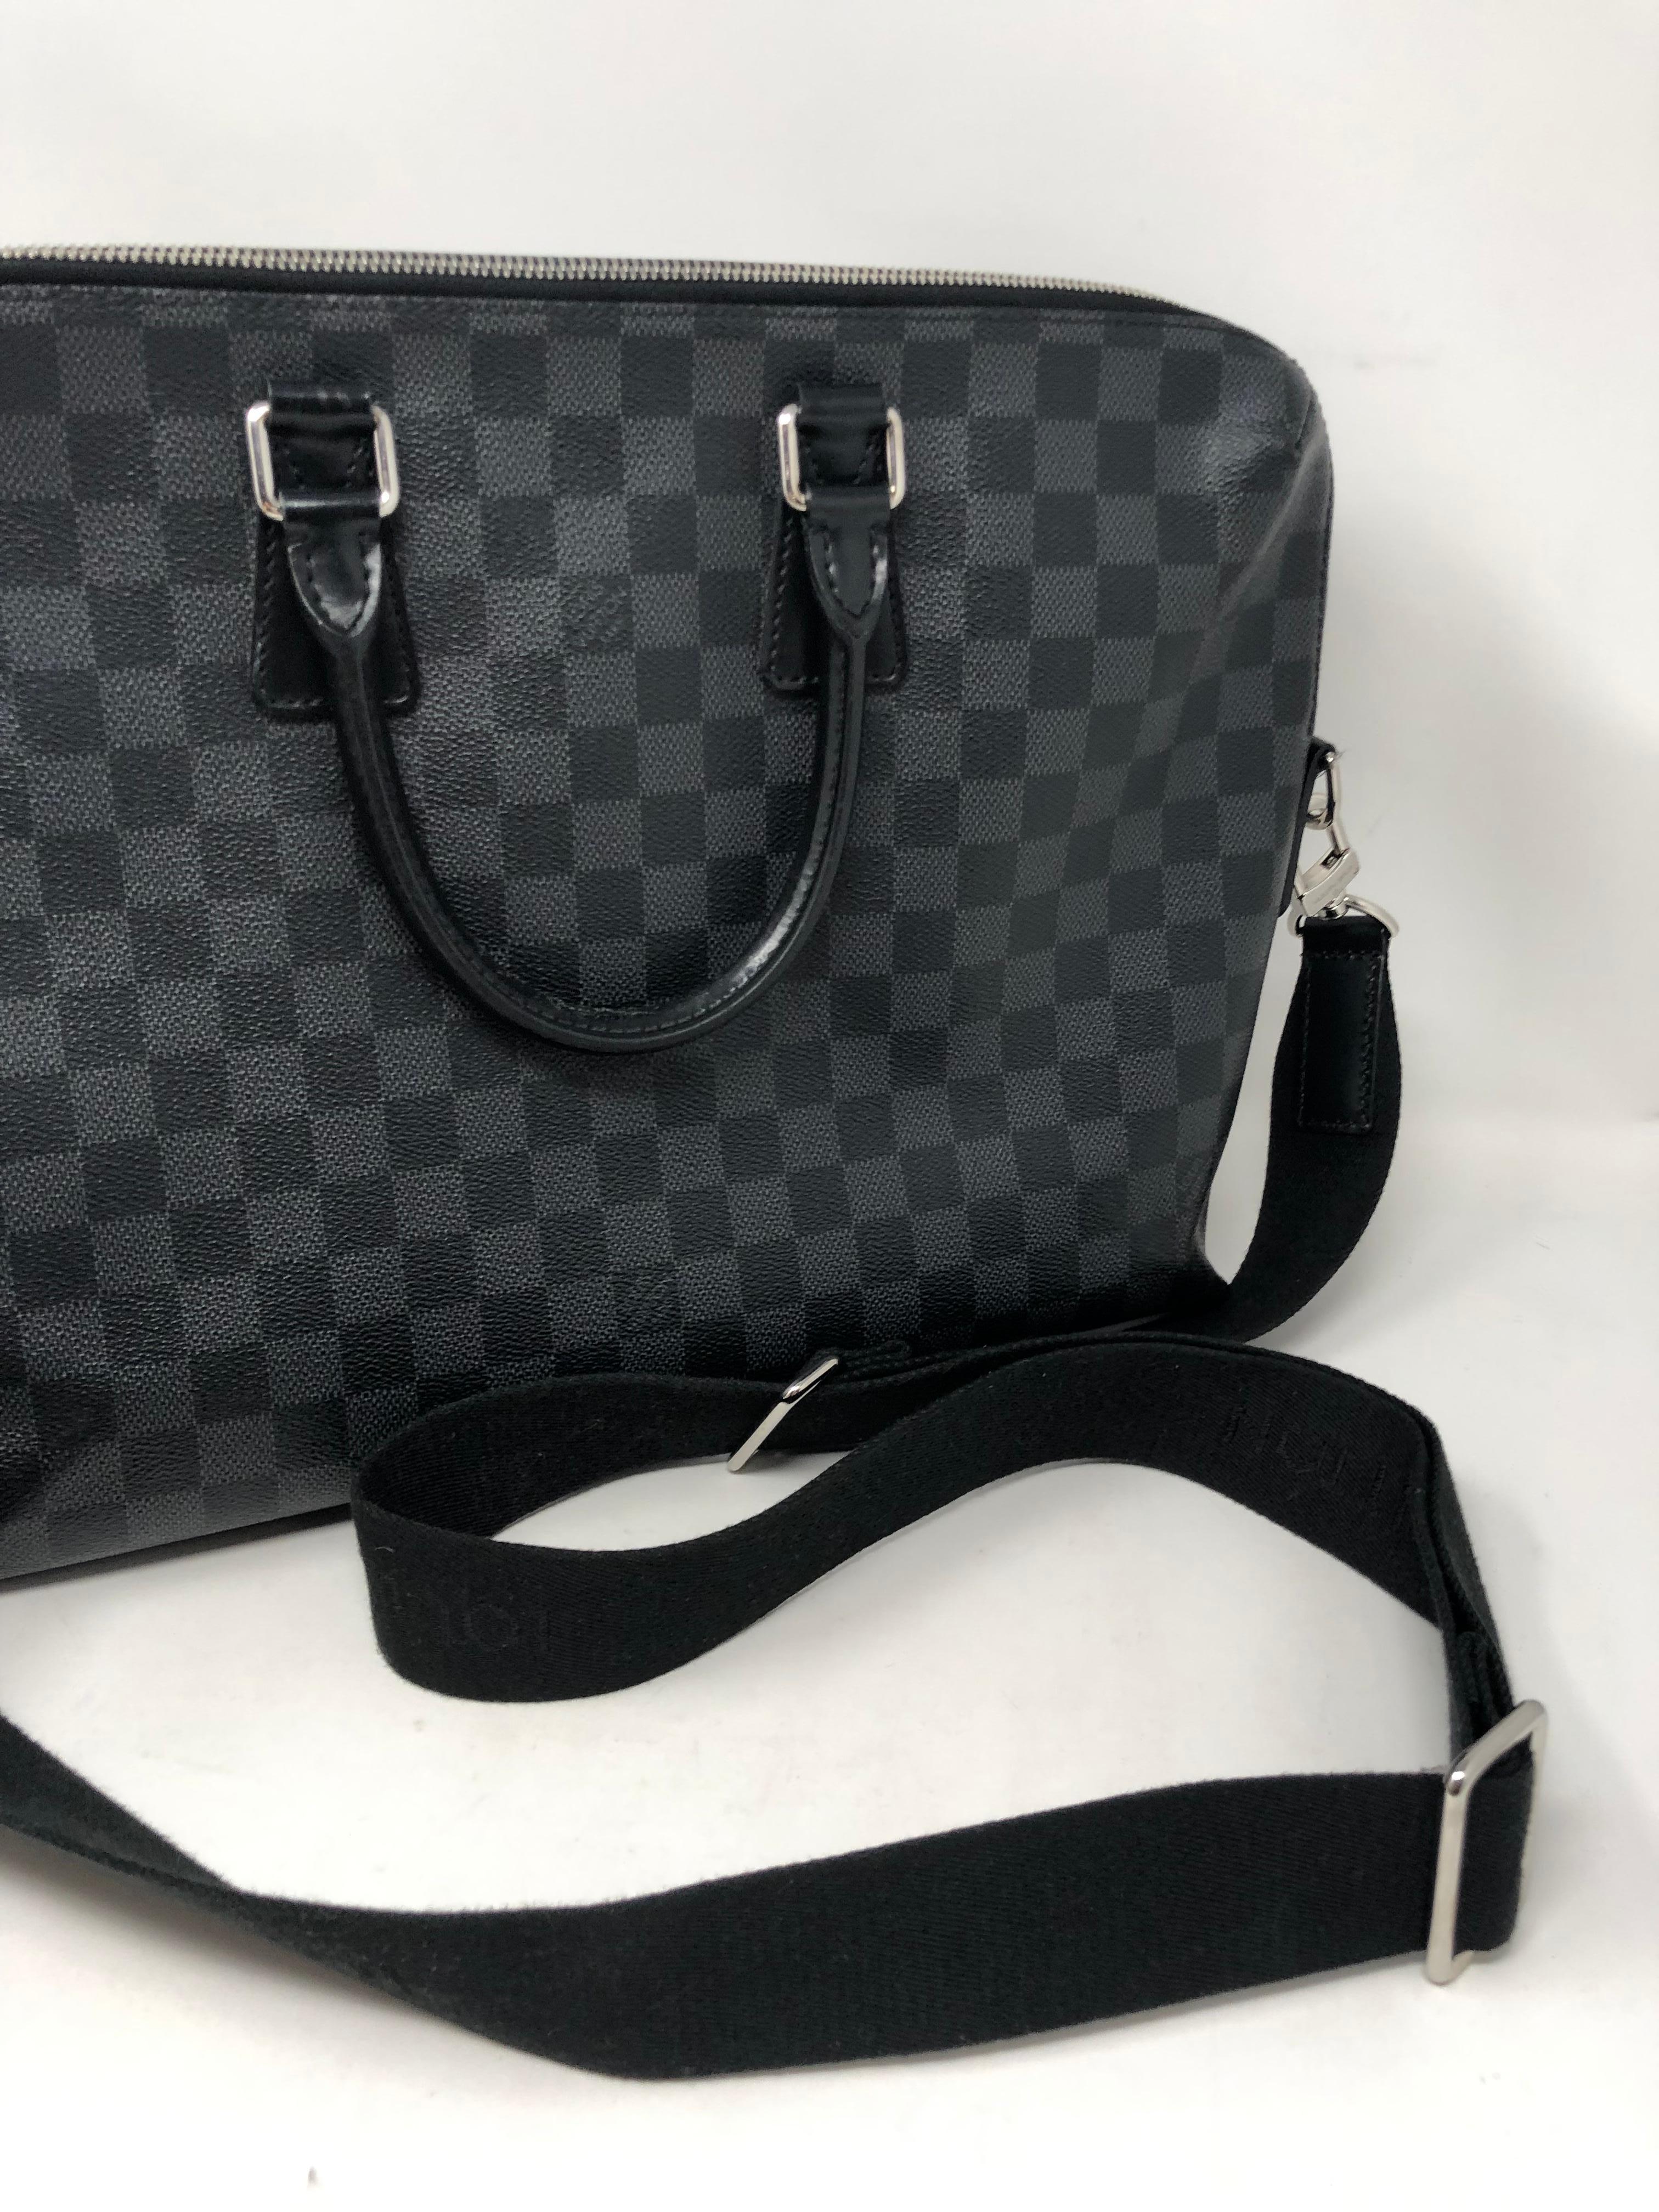 Louis Vuitton Graphite Messenger Bag. Great for a laptop holder or case. Black and grey checkered design LV. Includes detachable strap that is also adjustable. Great condition. Guaranteed authentic. 